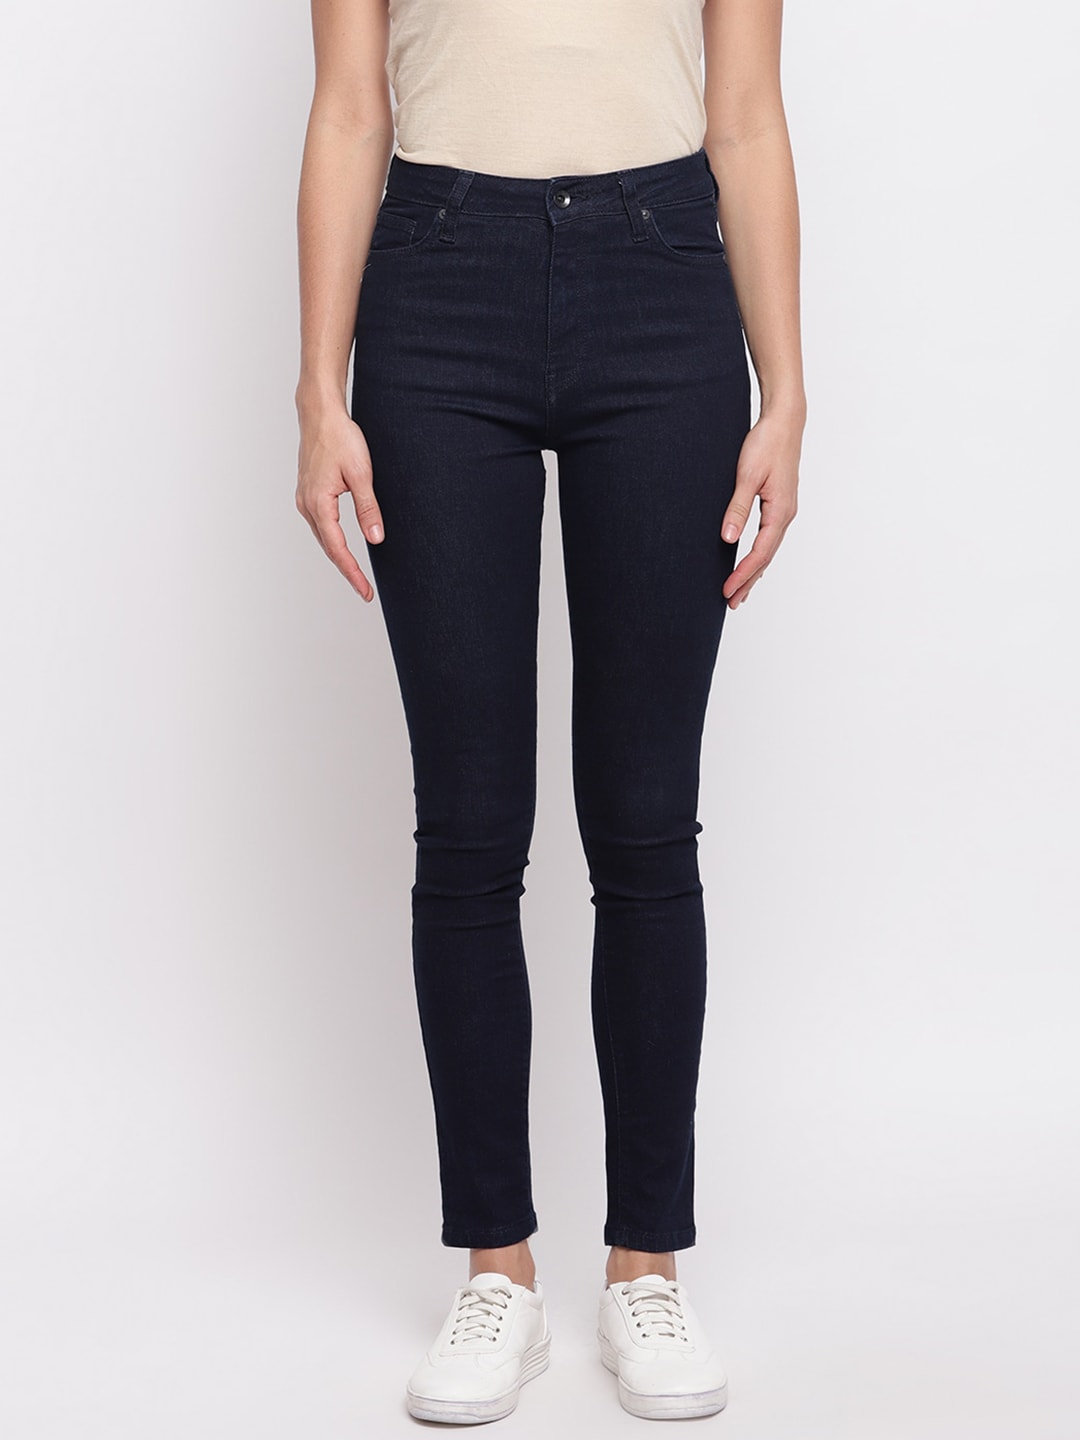 Pepe Jeans Women Blue Regular Fit High-Rise Clean Look Jeans Price in India